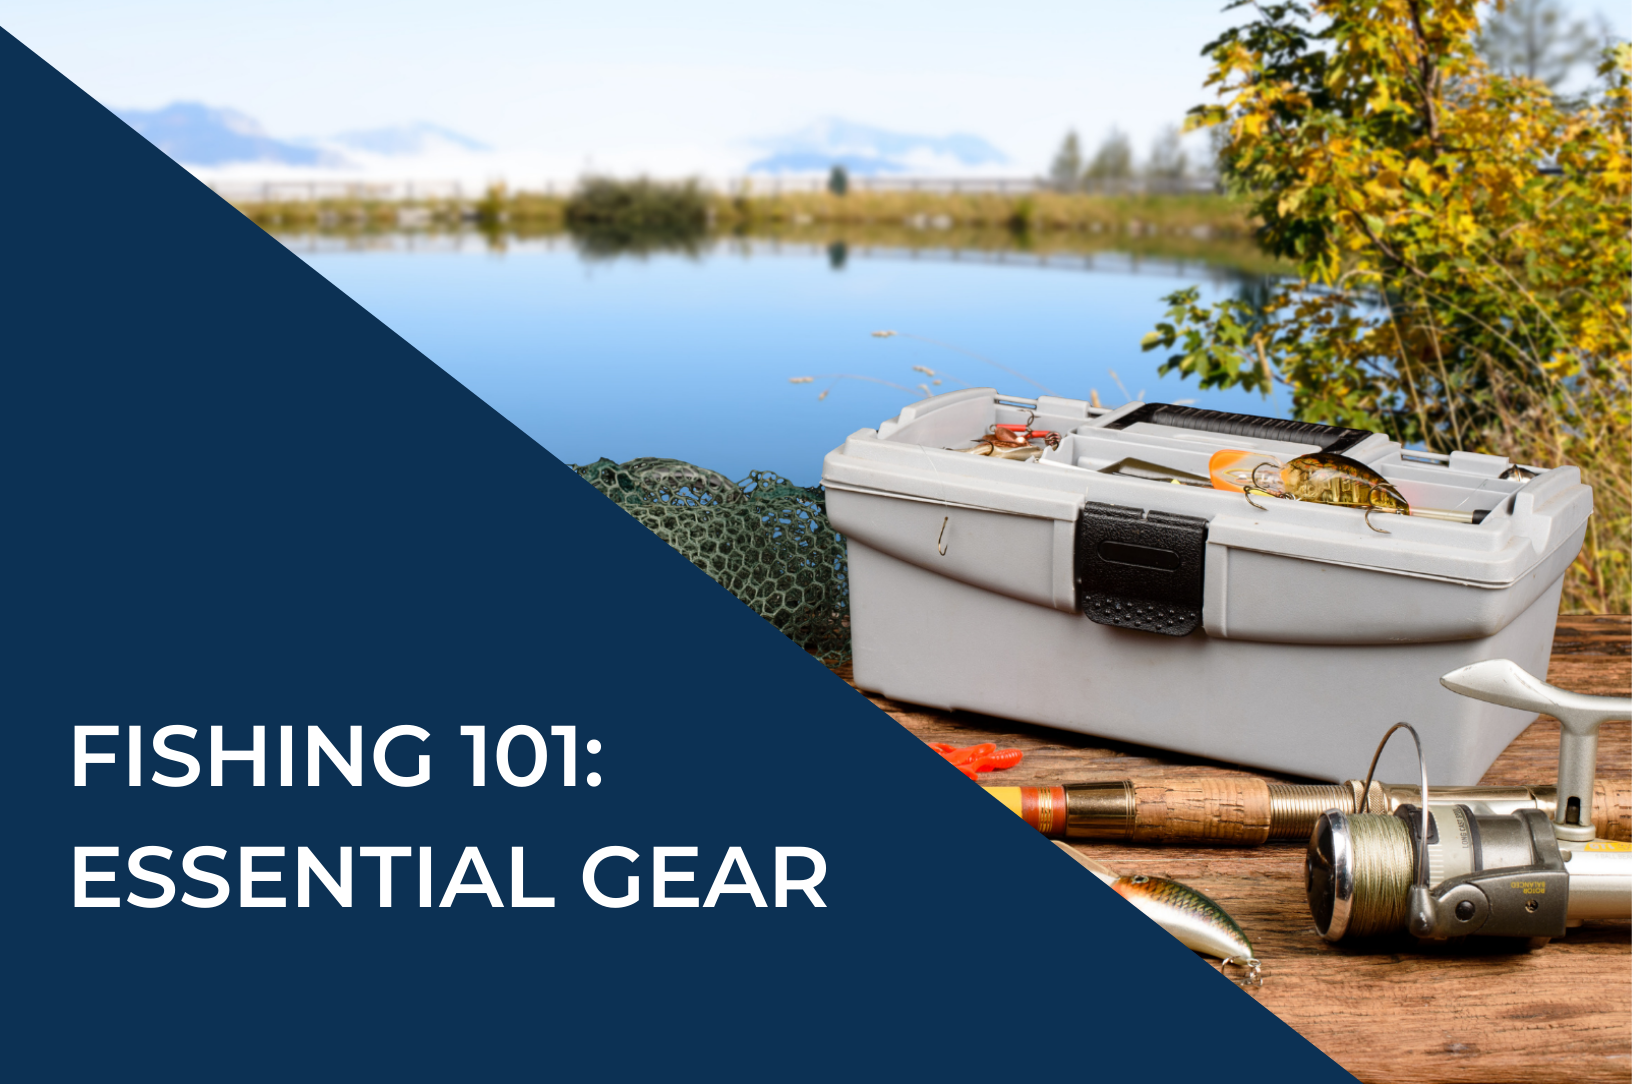 Essential gear for new anglers